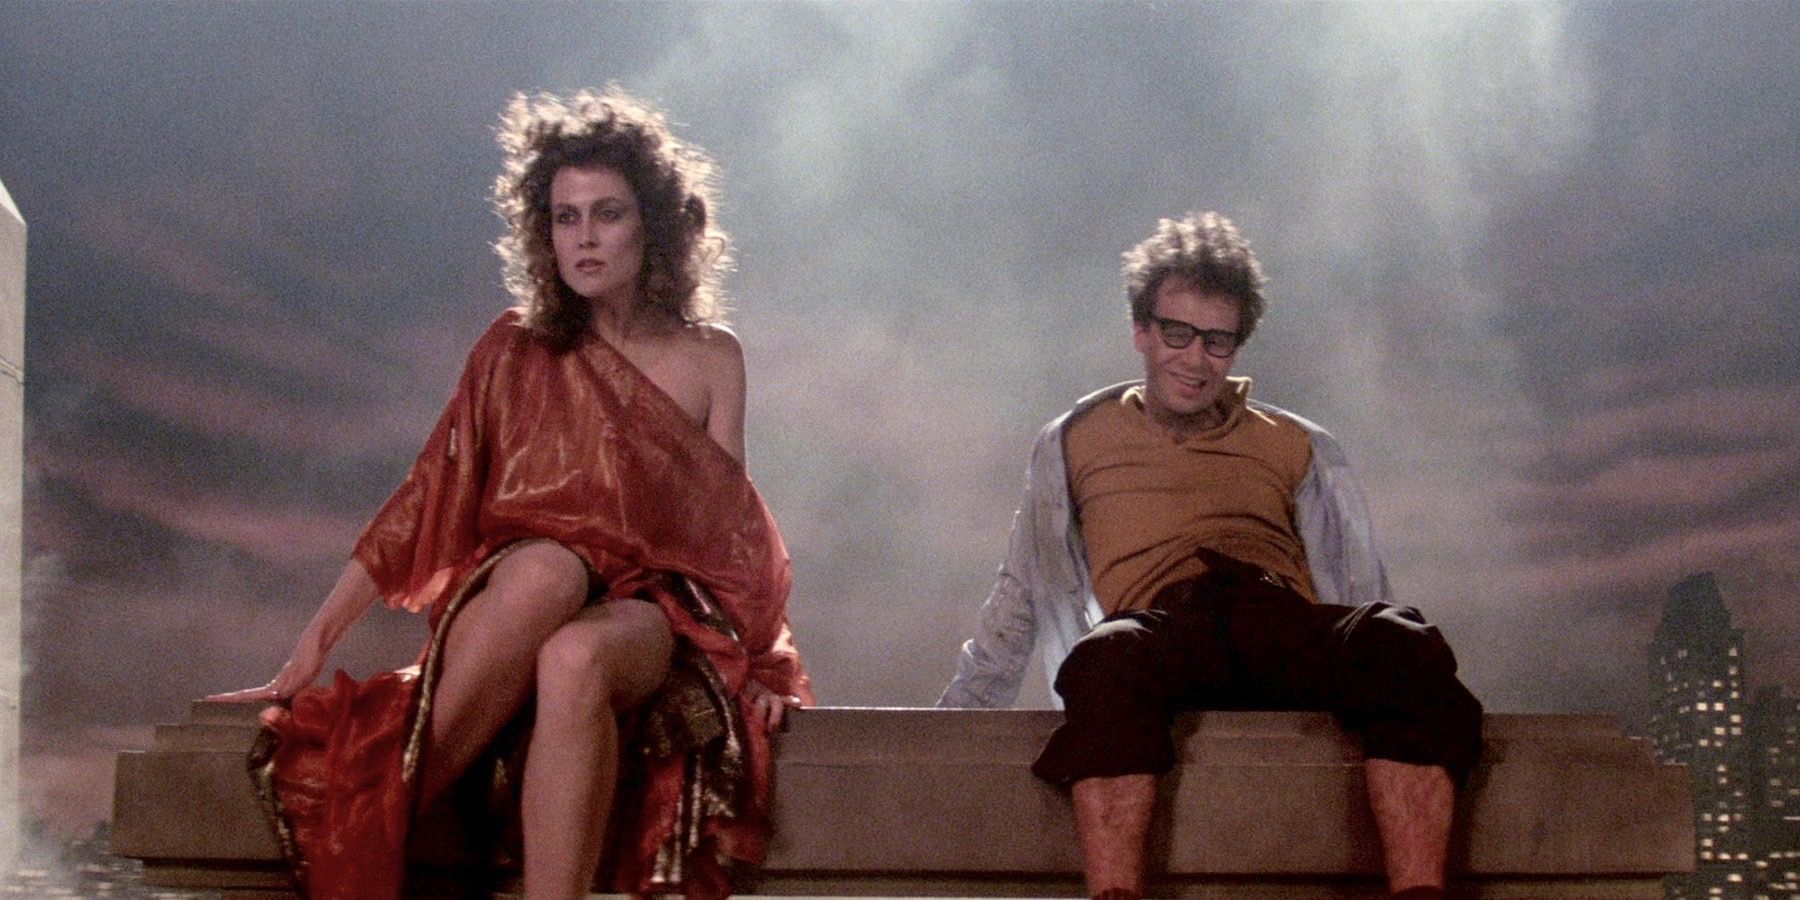 Zuul and Vinz in Ghostbusters